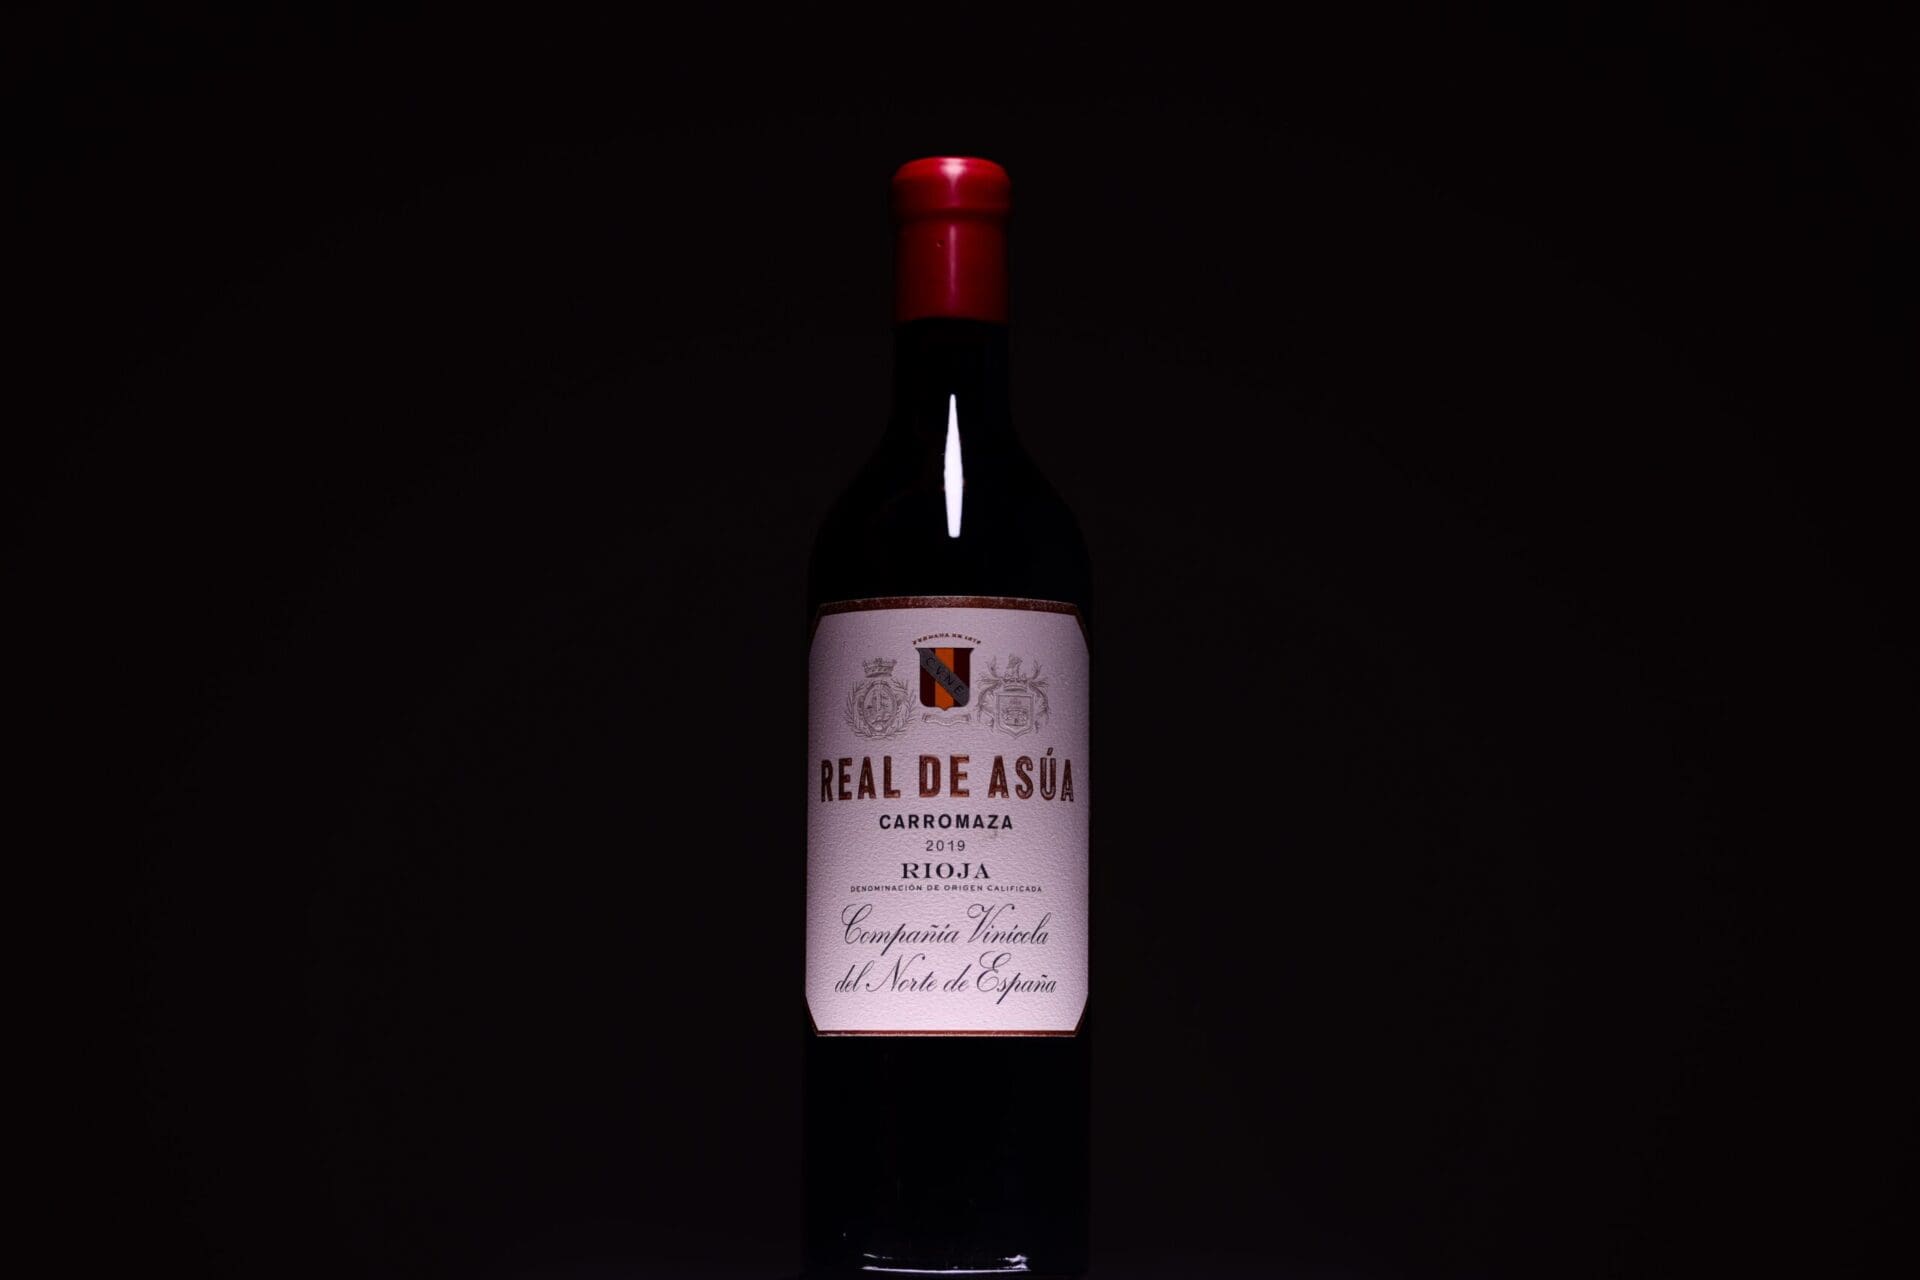 Iconic Rioja Wine Real de Asua (Cvne, Spain) Released for the Very First Time Via la Place de Bordeaux on September 21st